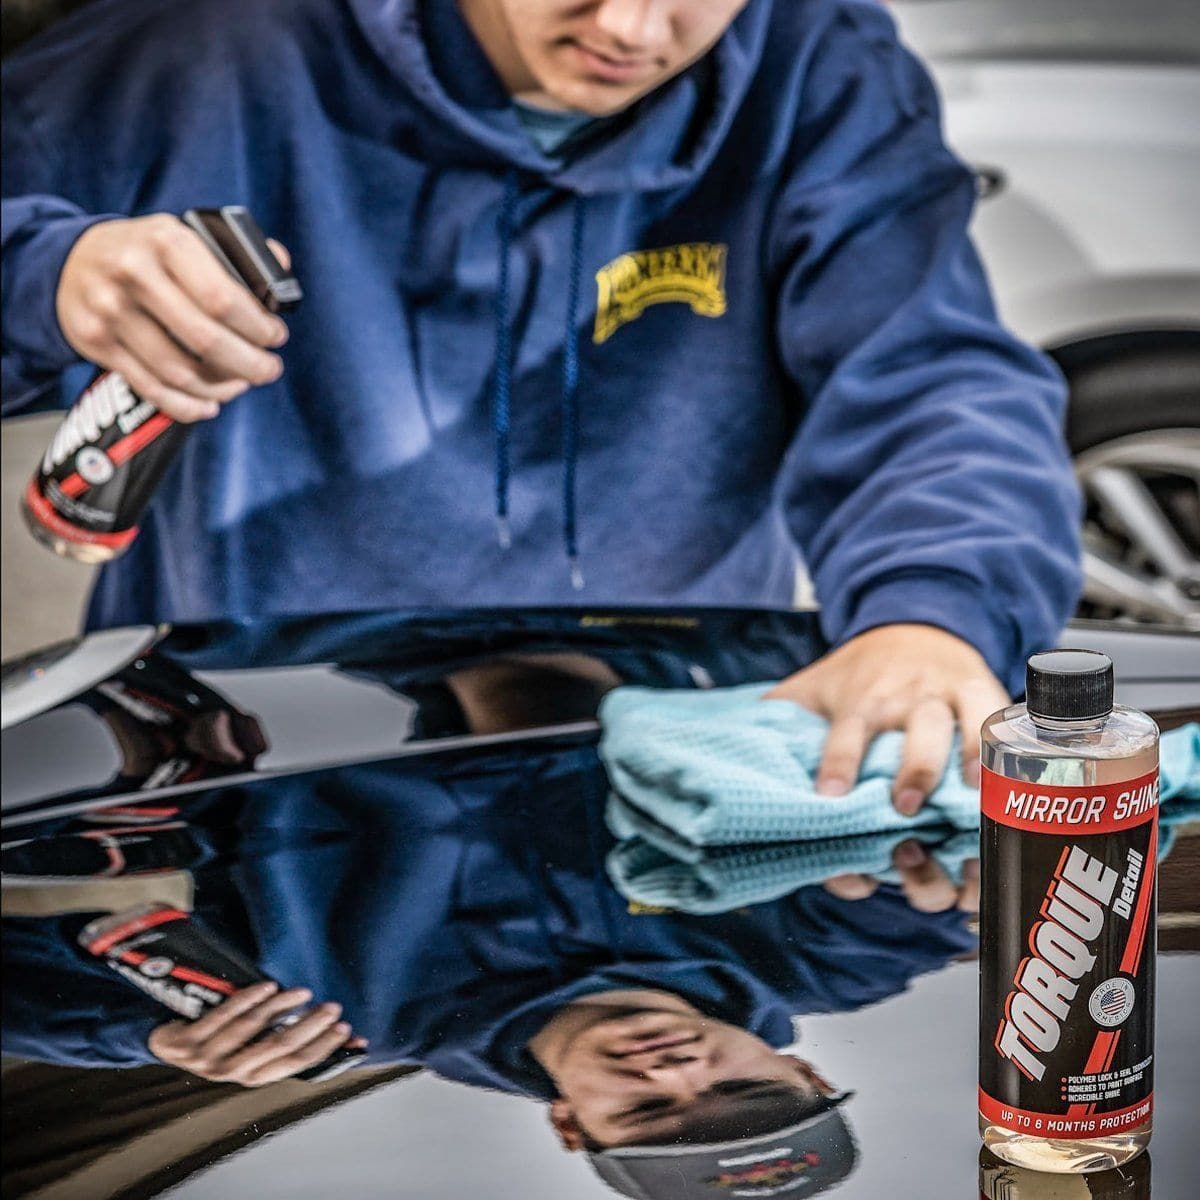 Torque Detail: NEW PRO GUIDE: How to Wax A Car Step by Step